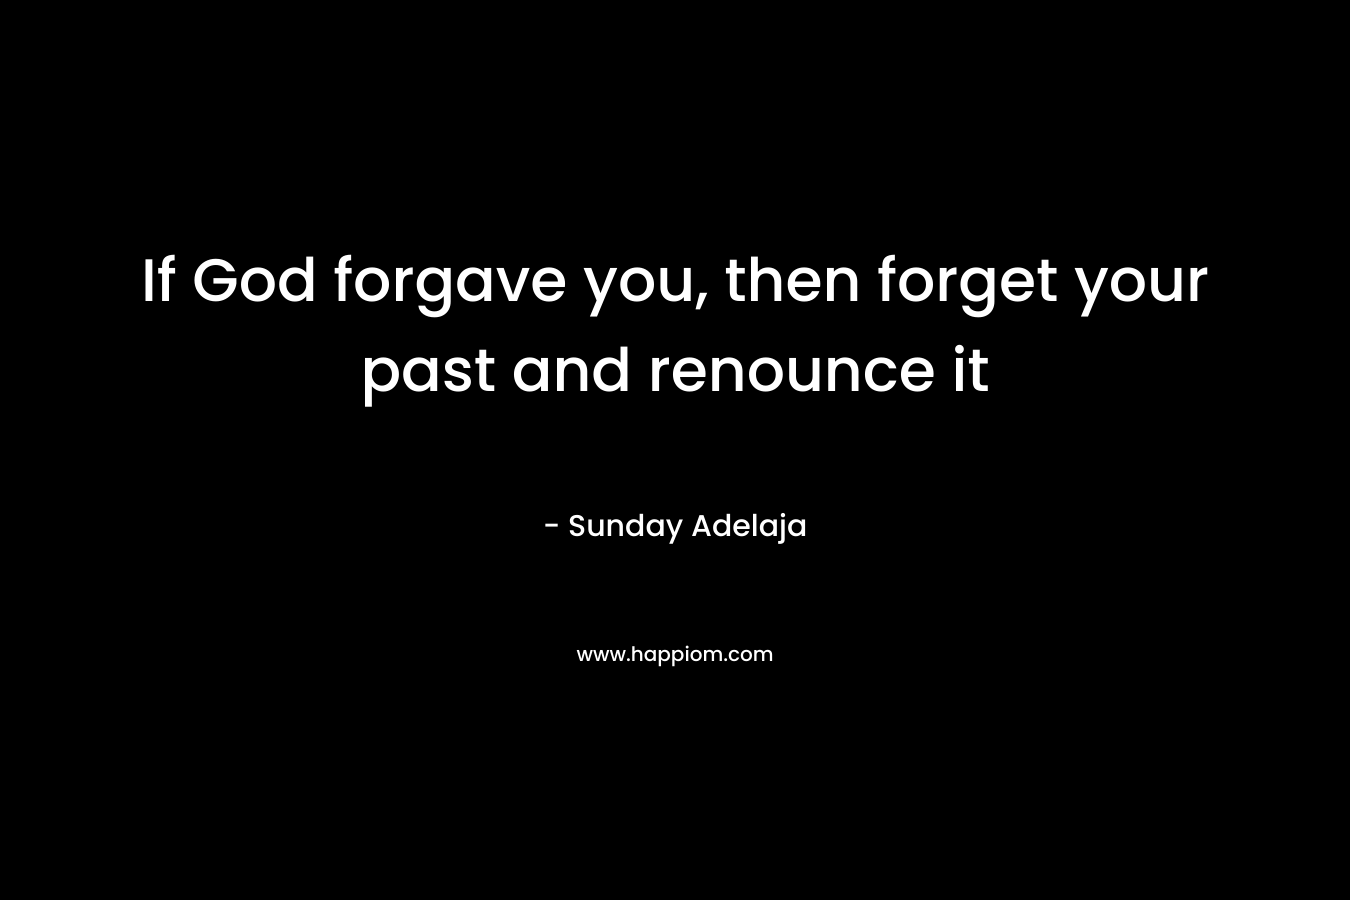 If God forgave you, then forget your past and renounce it